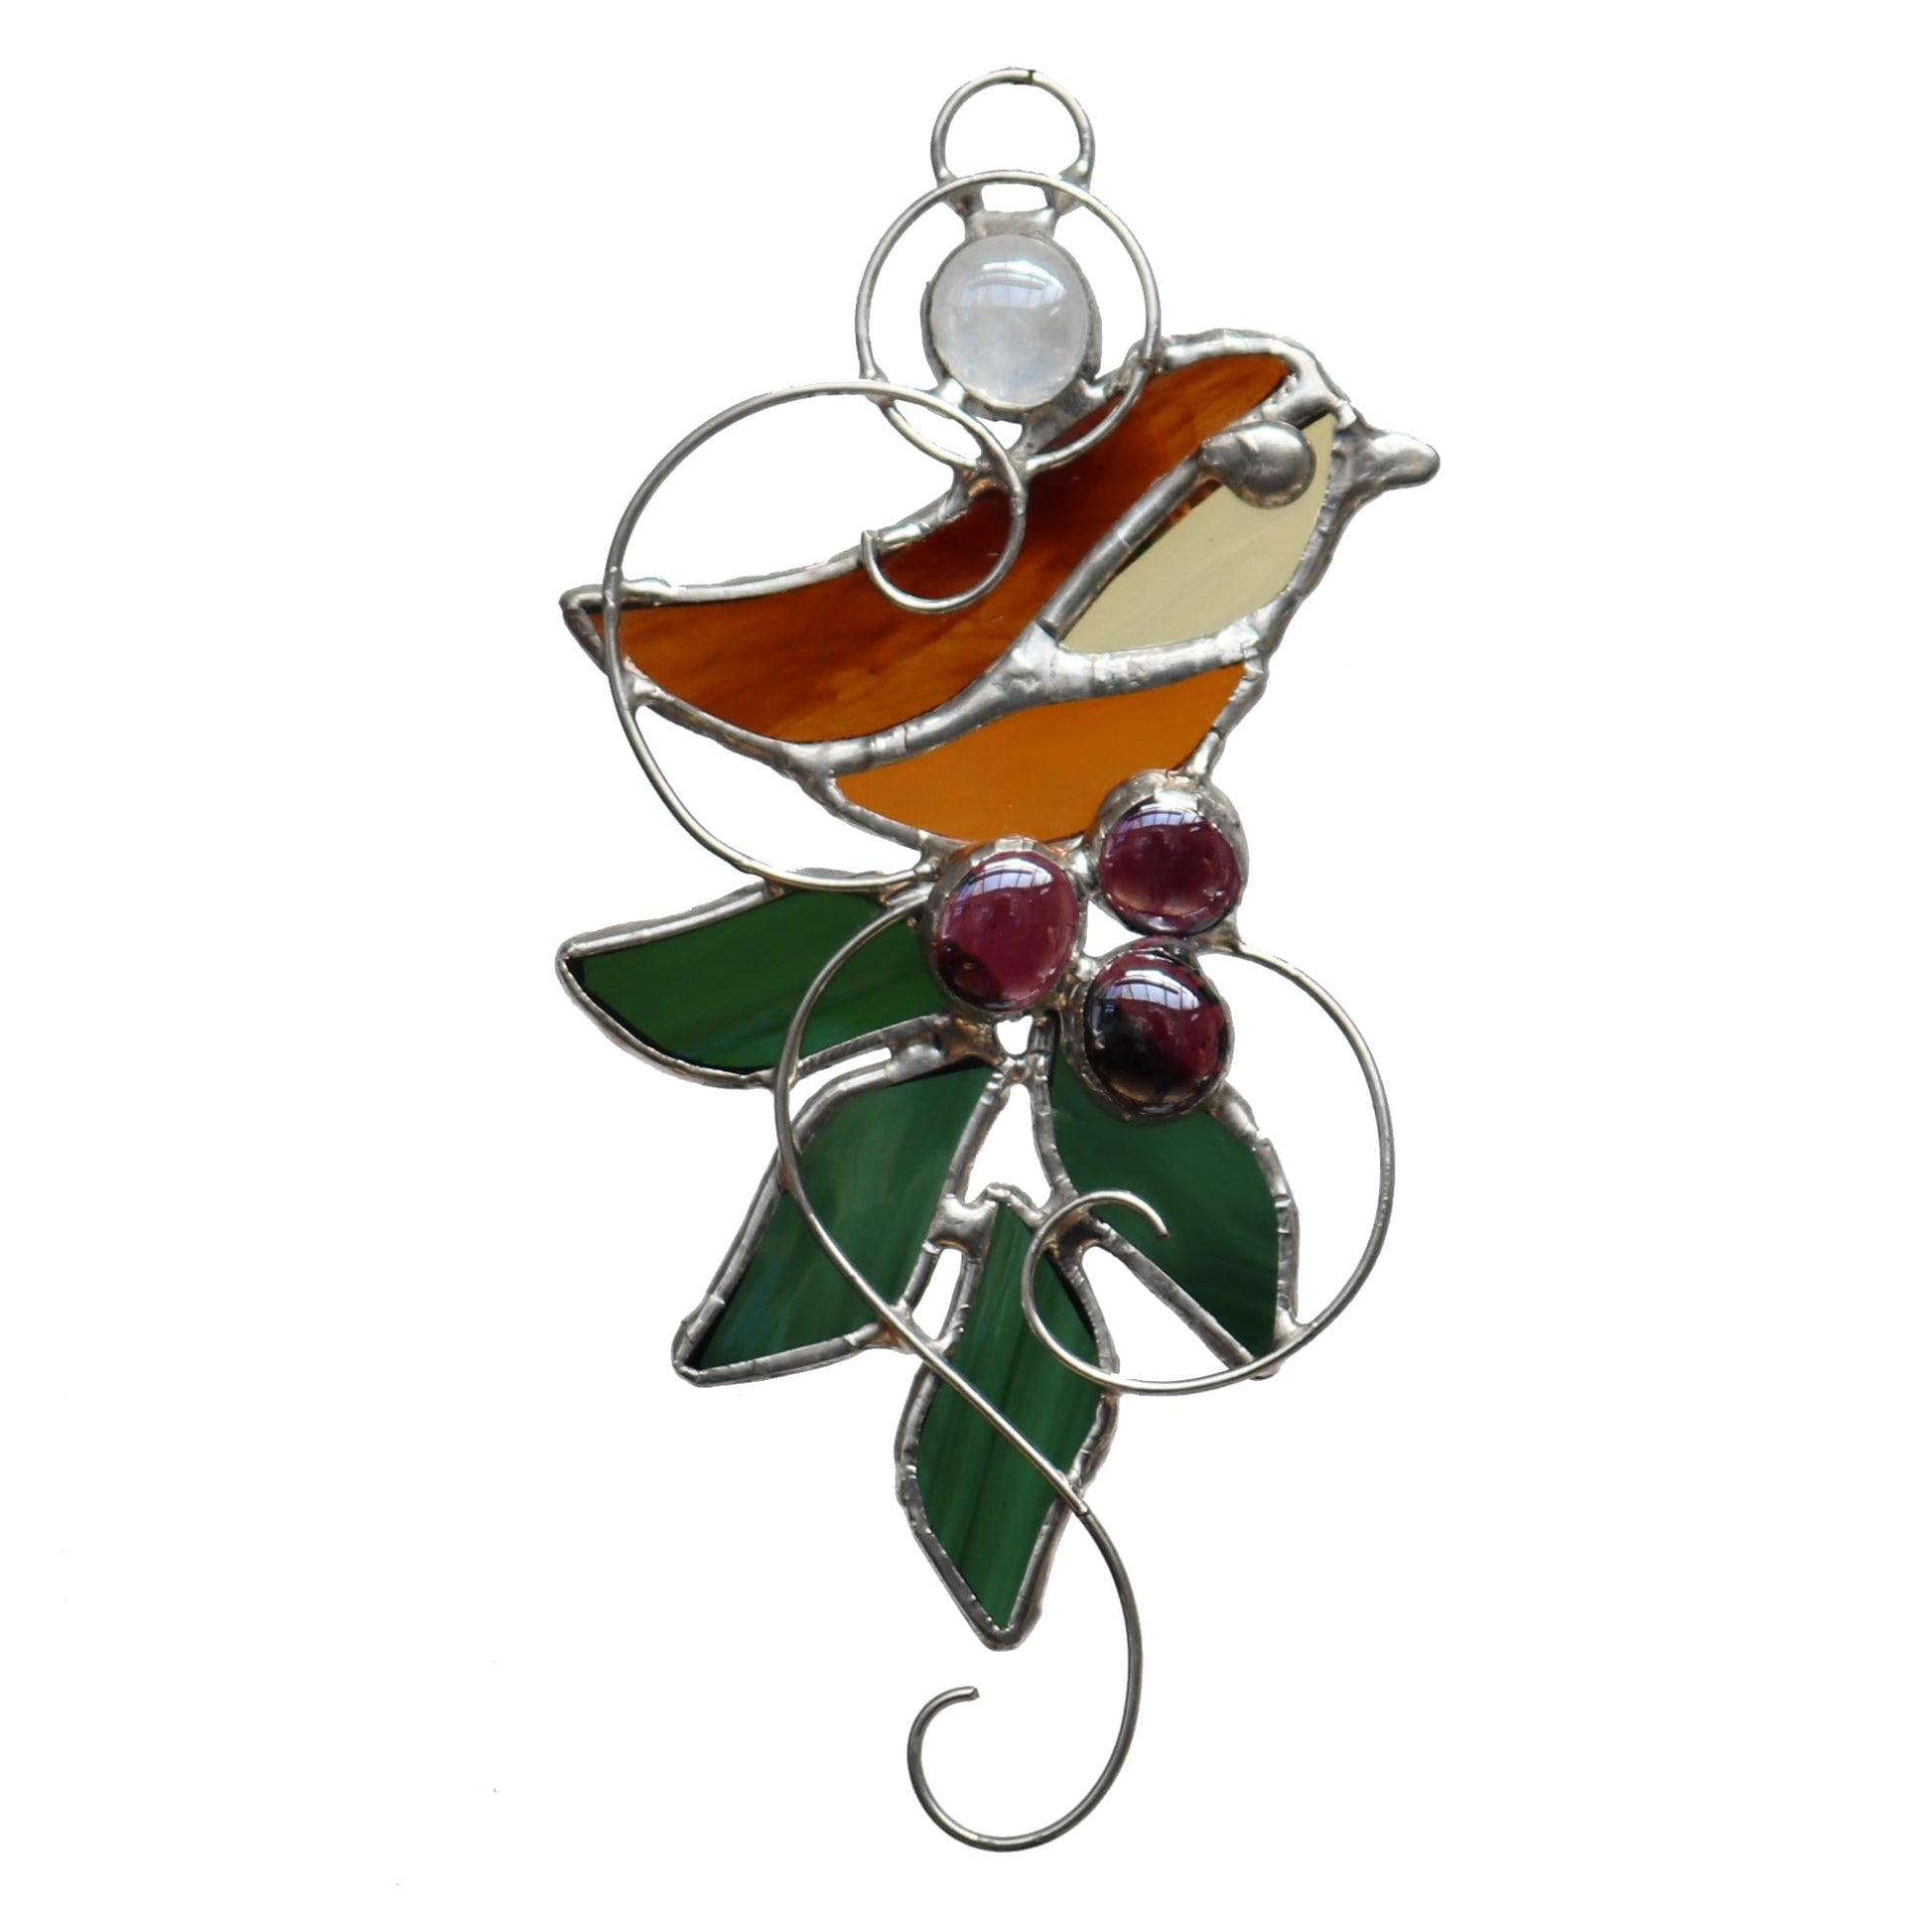 Amber Stained Glass Sun Catcher Bird and Leaves Design